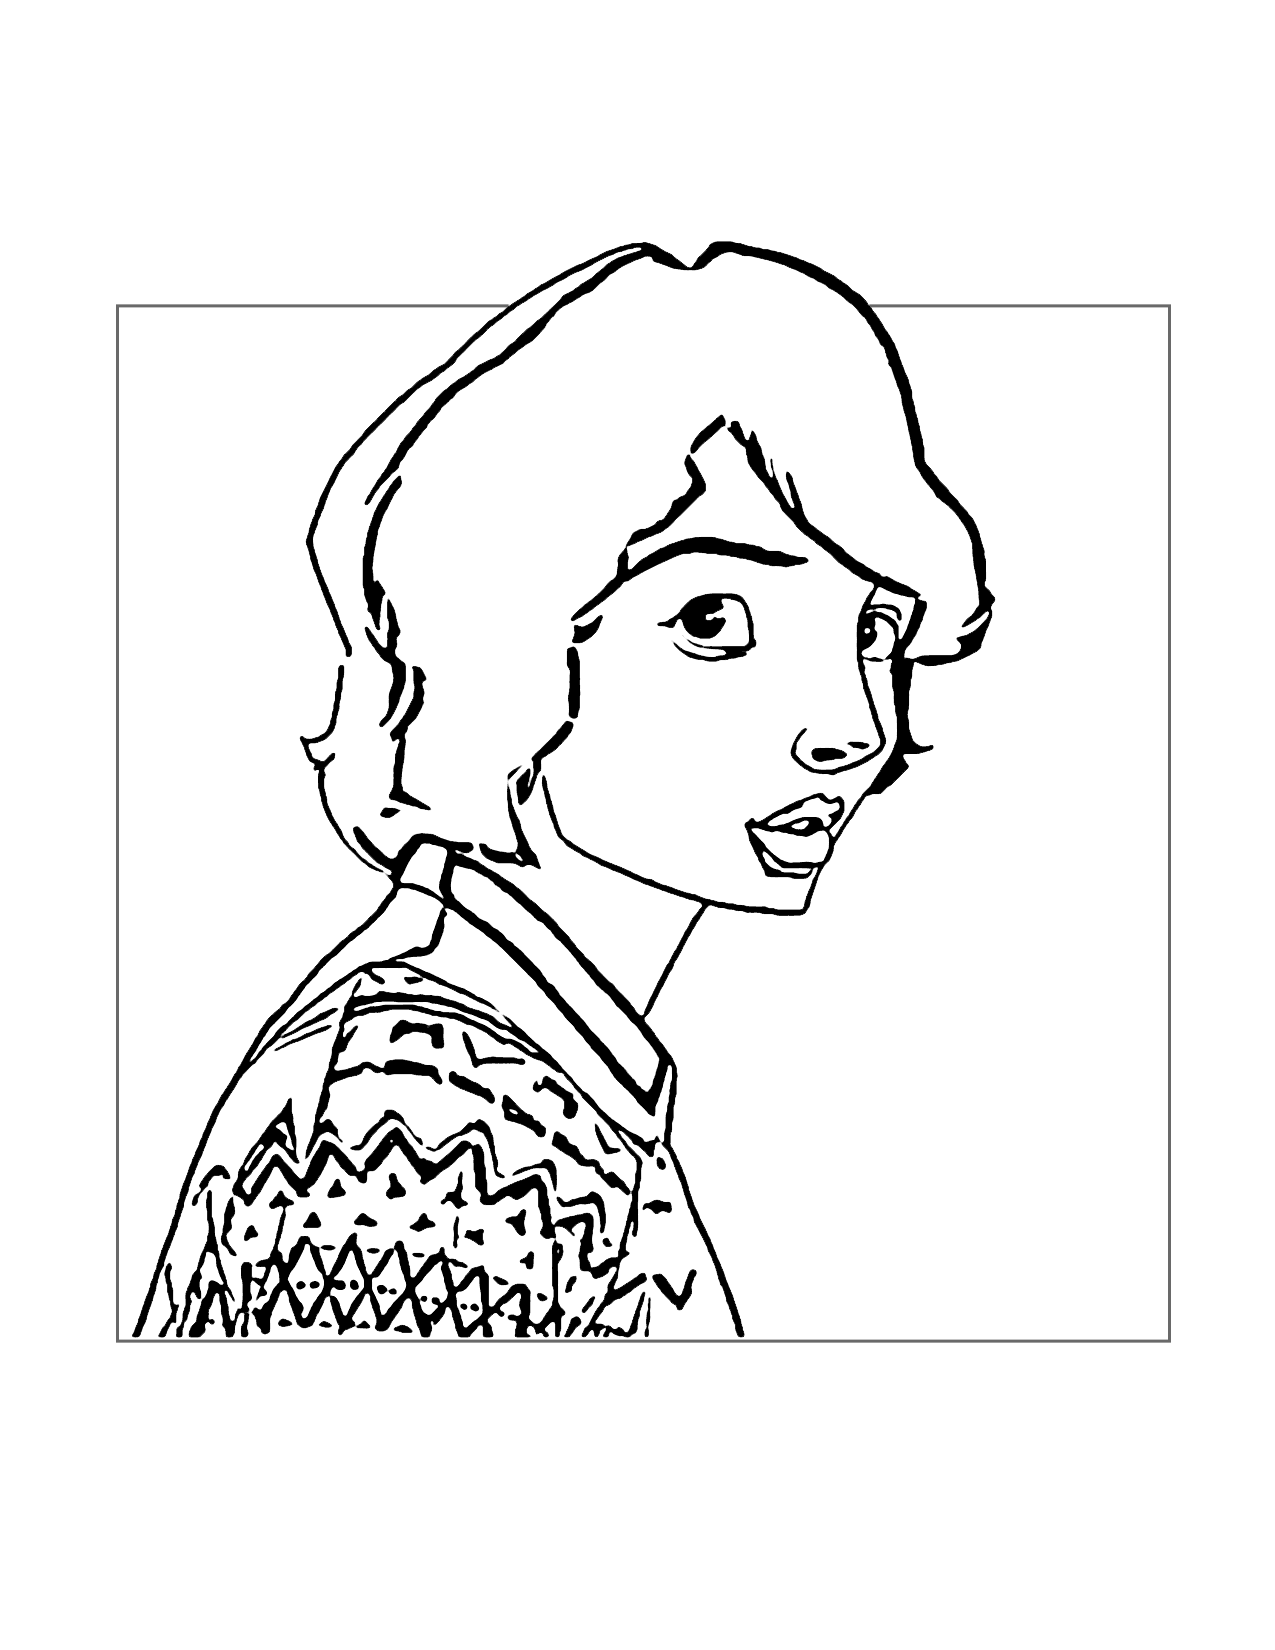 Mike Stranger Things Coloring Page